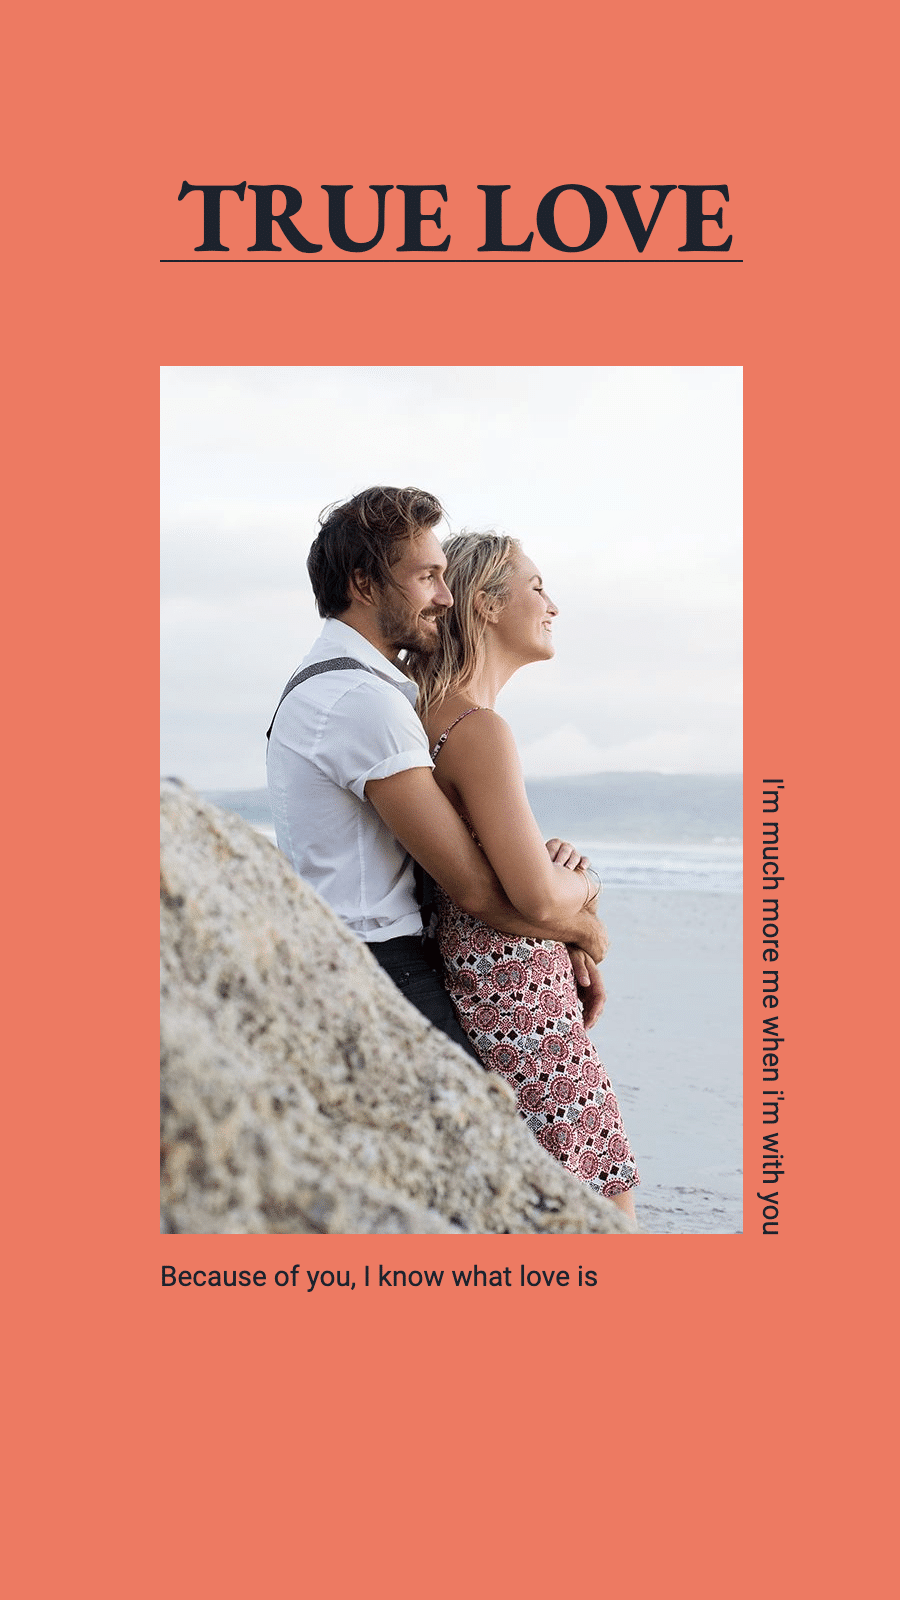 Valentine's Day Couple Photo Romantic Art Simple Fashion Style Instagram Story